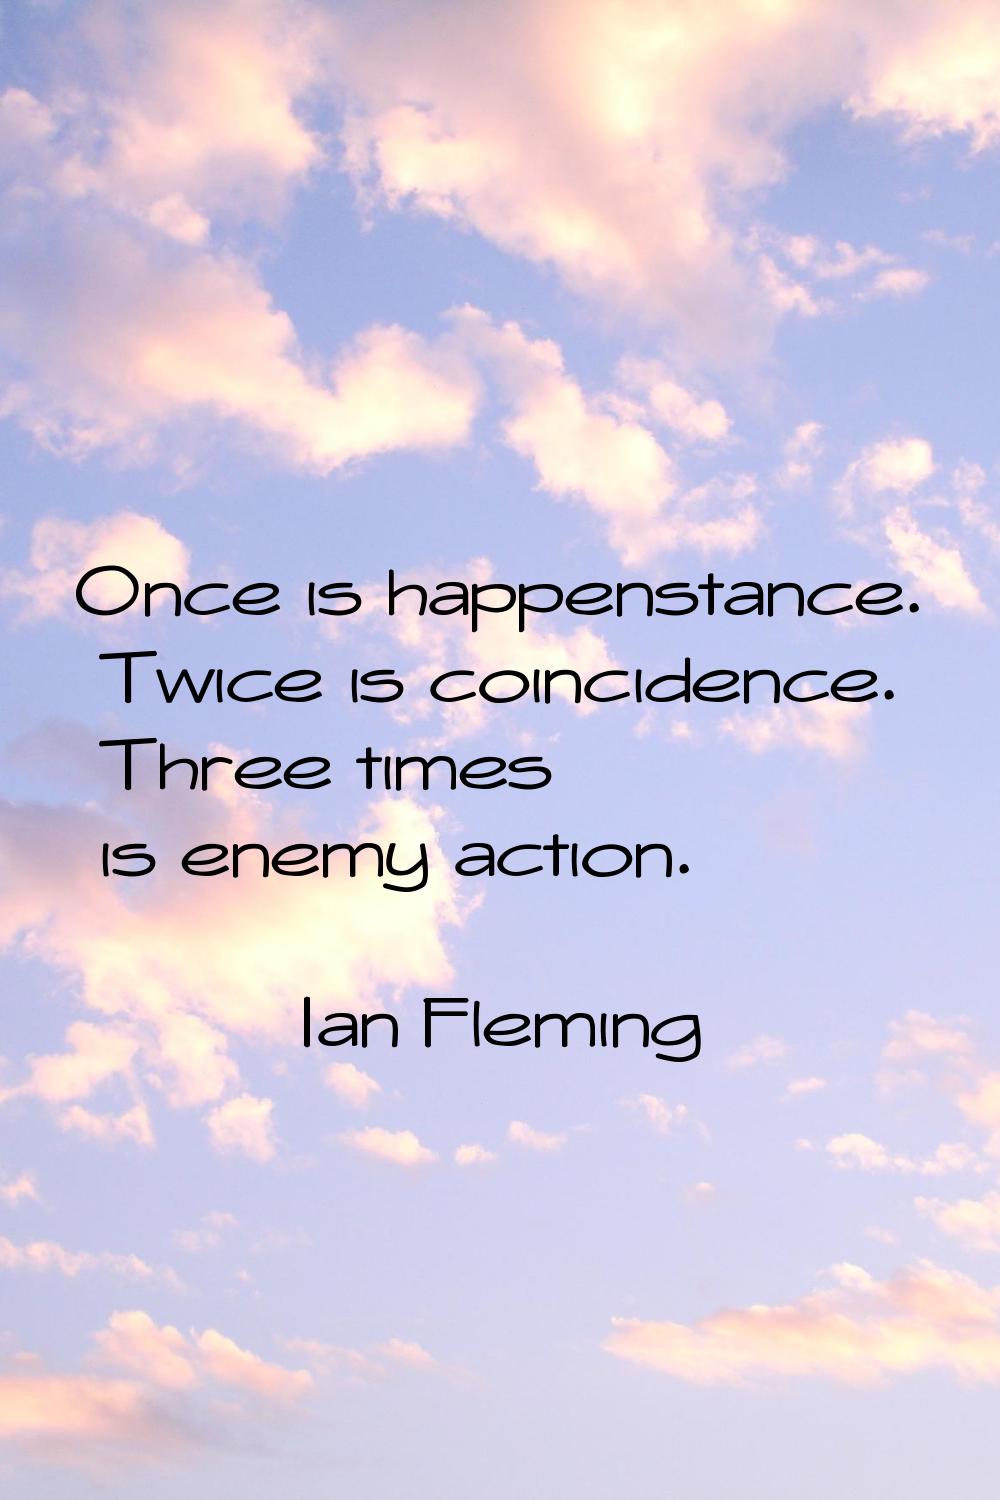 Once is happenstance. Twice is coincidence. Three times is enemy action.